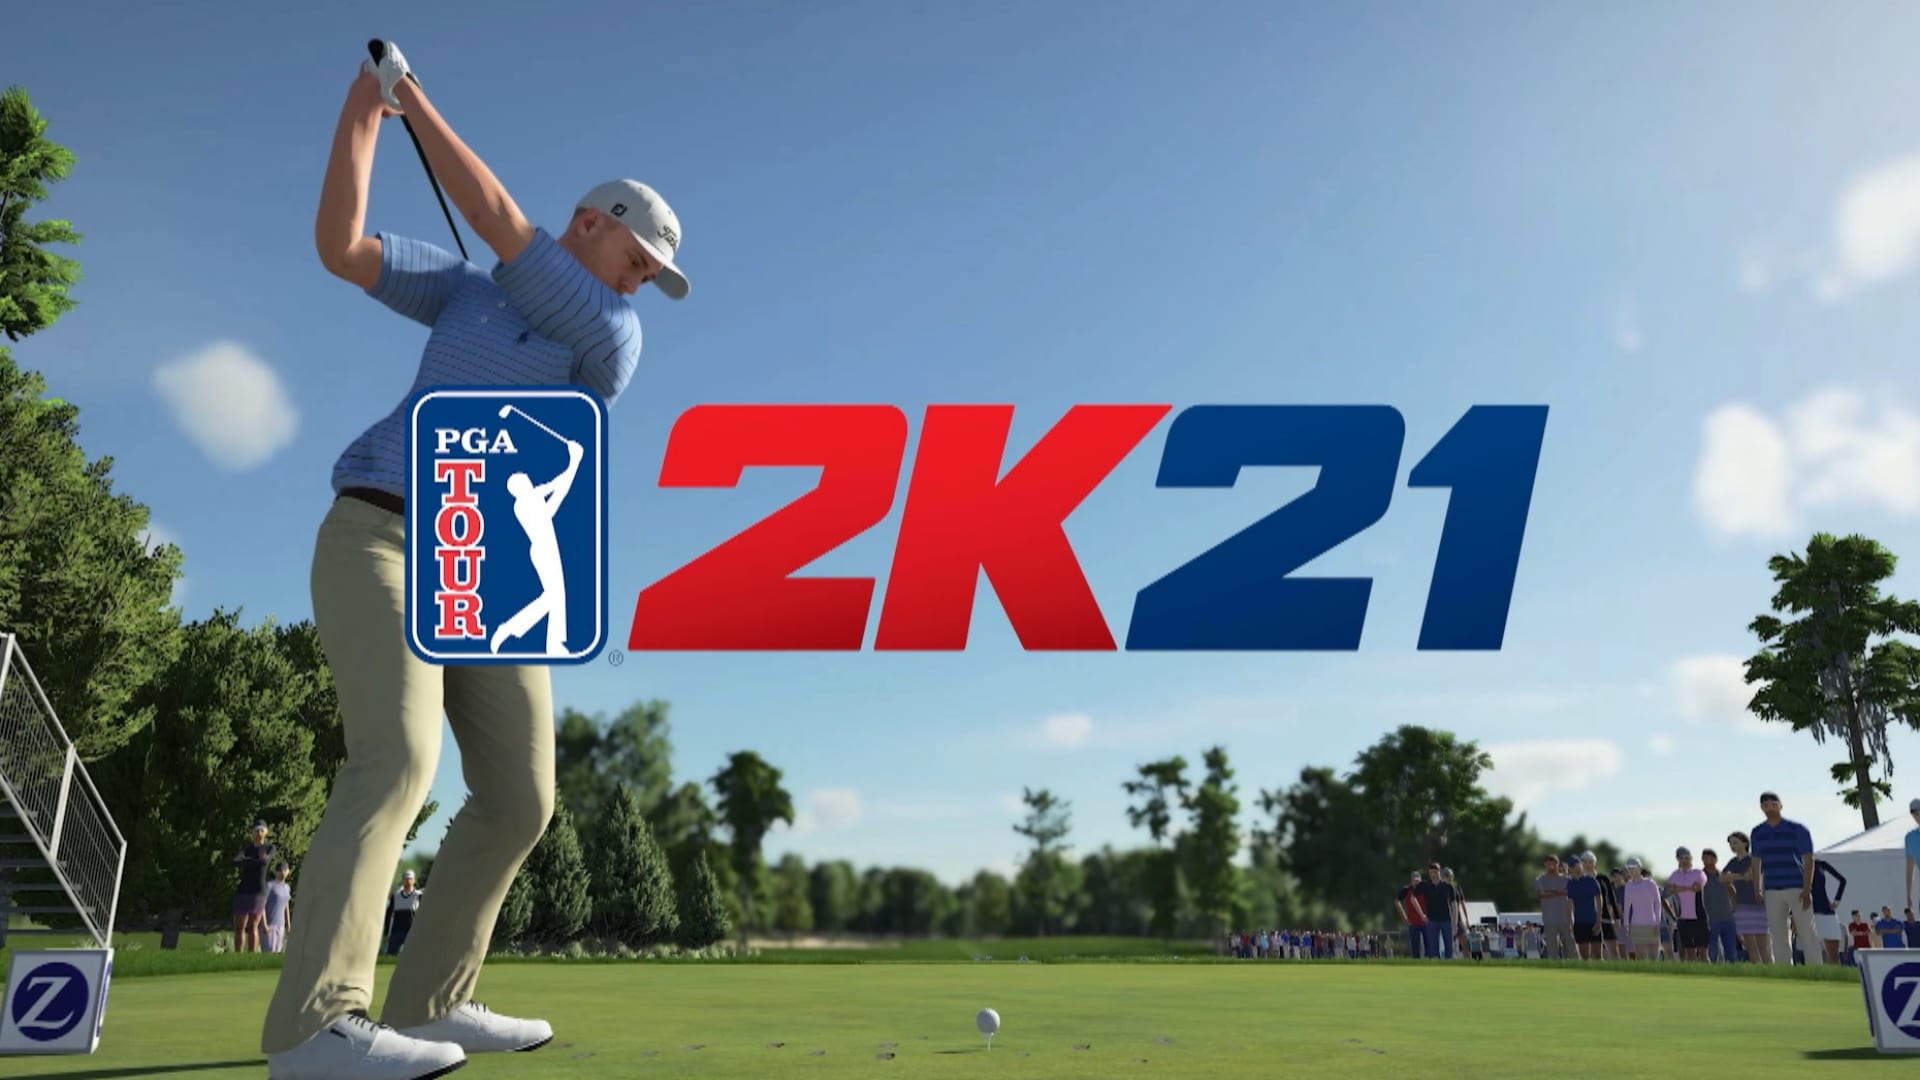 PGA TOUR 2K21 video game tees off worldwide in August